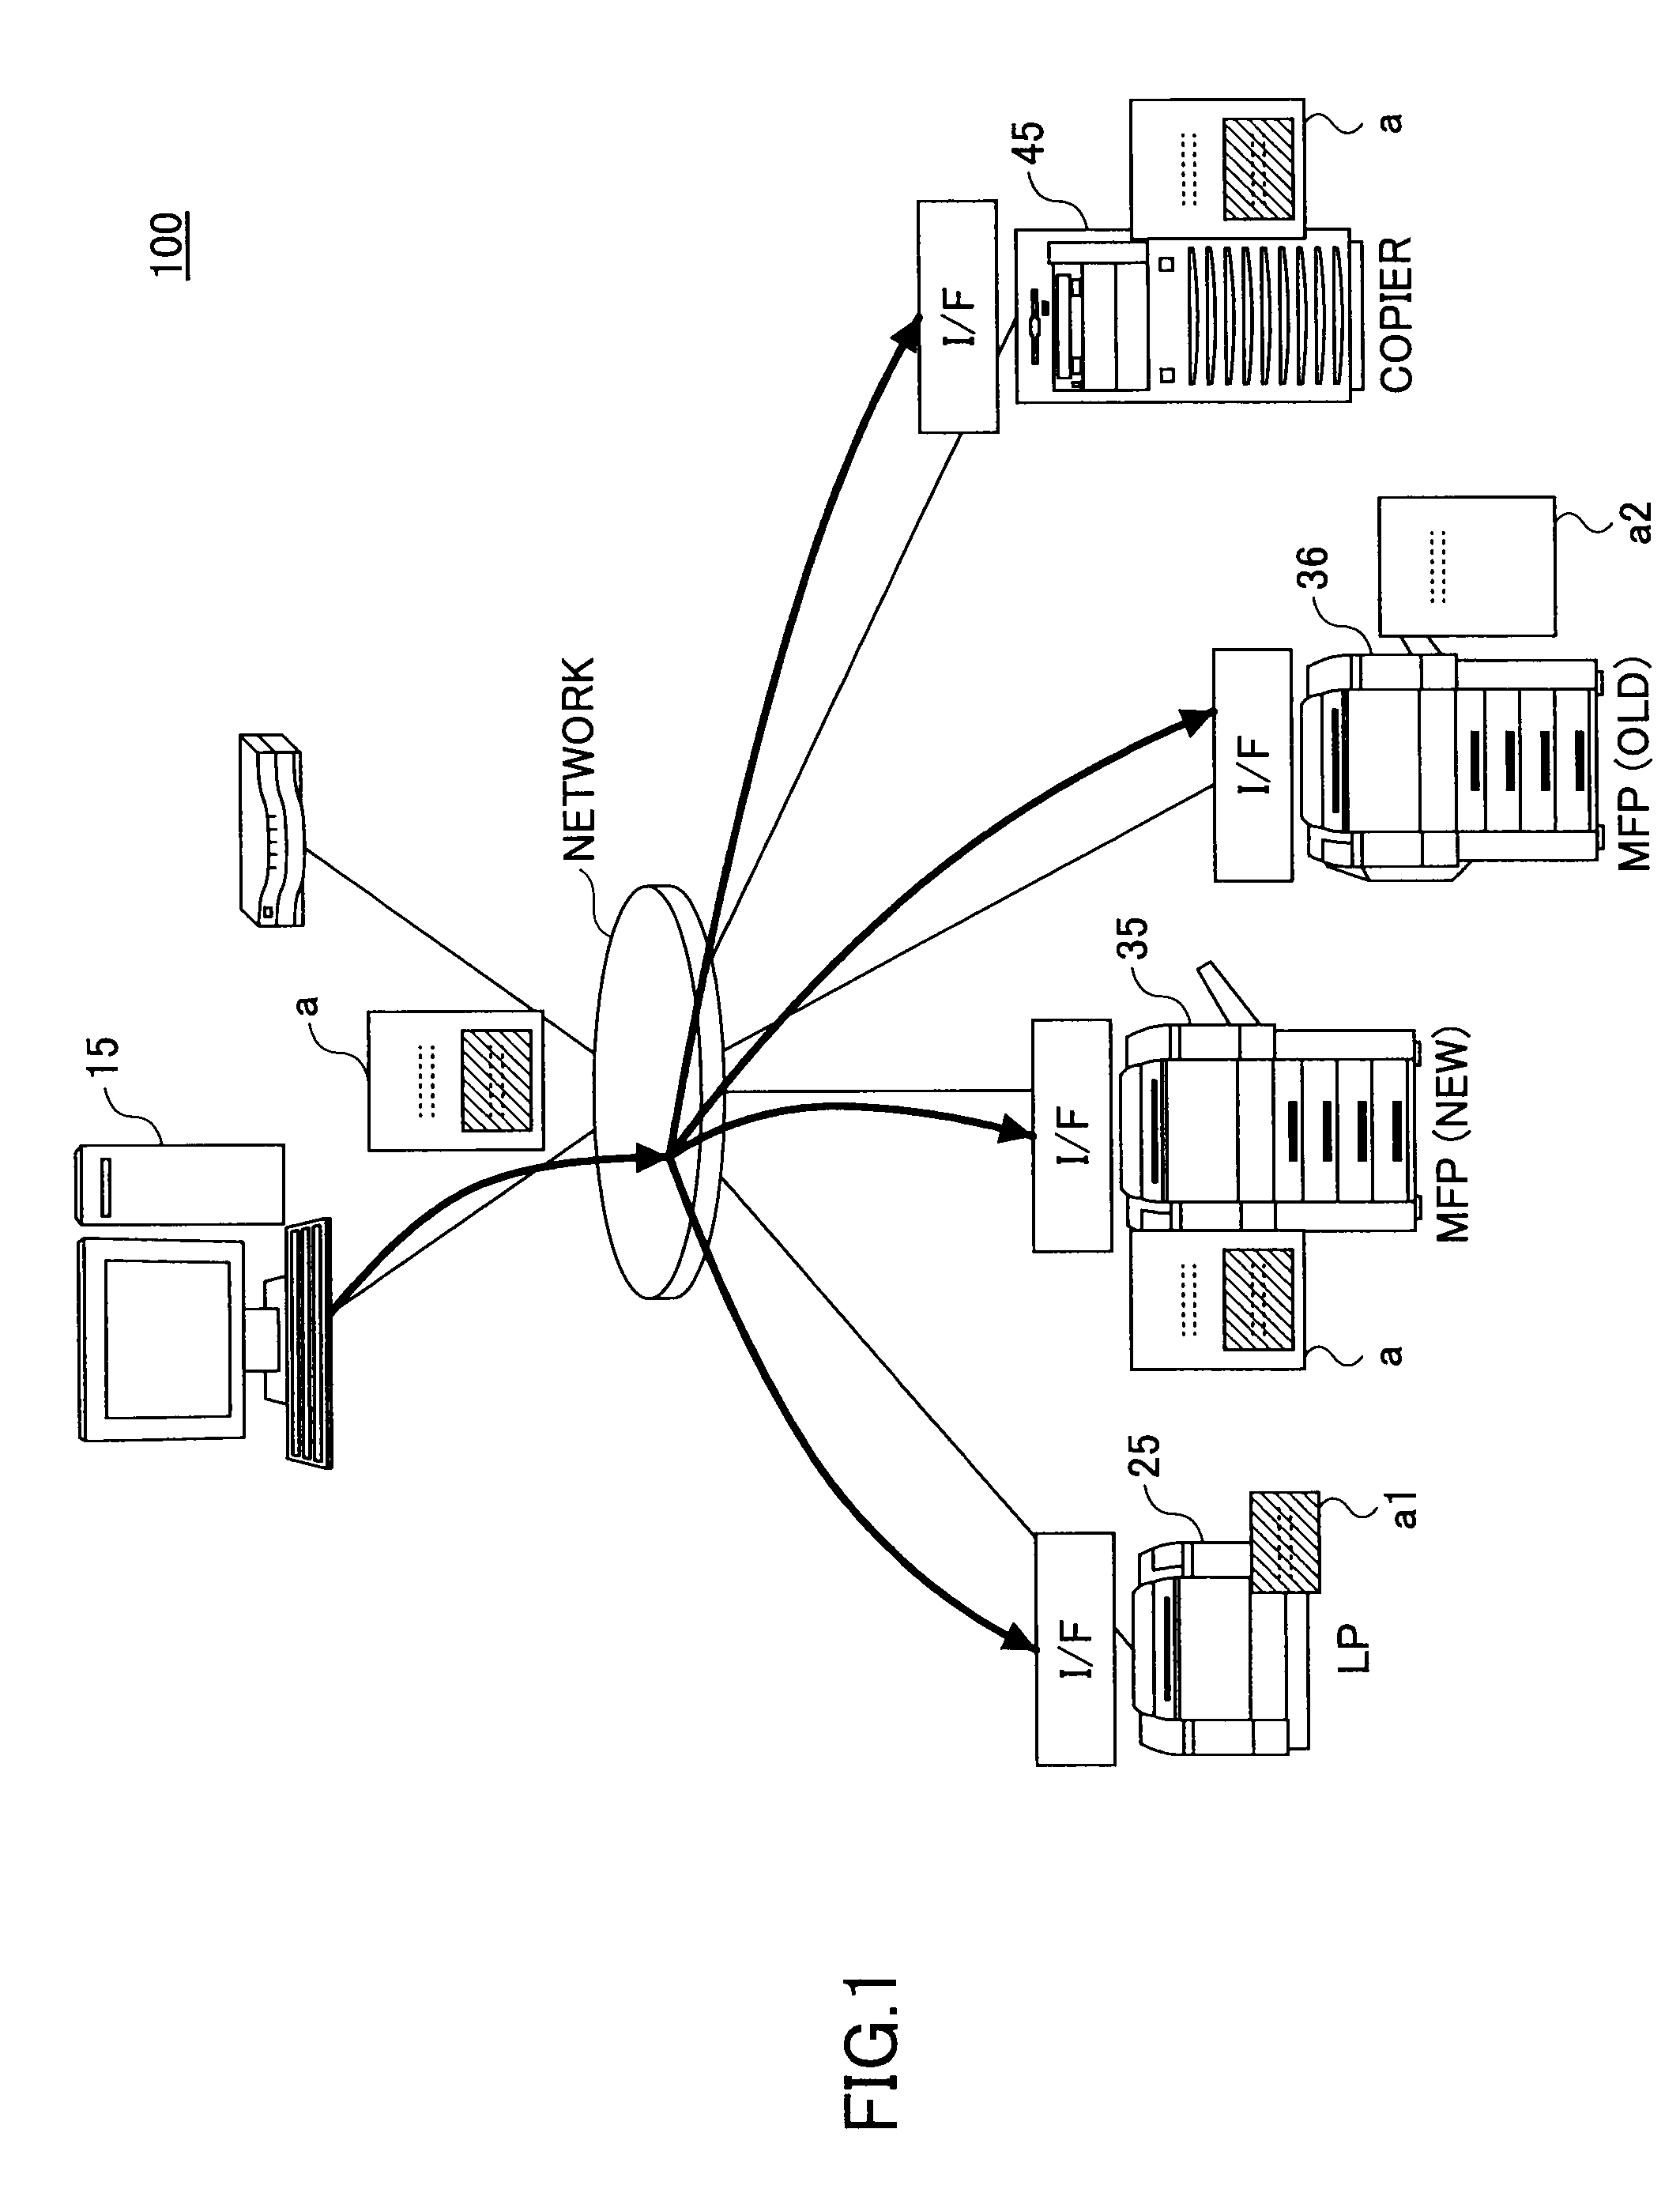 Image forming apparatus, image forming system, and information processing method